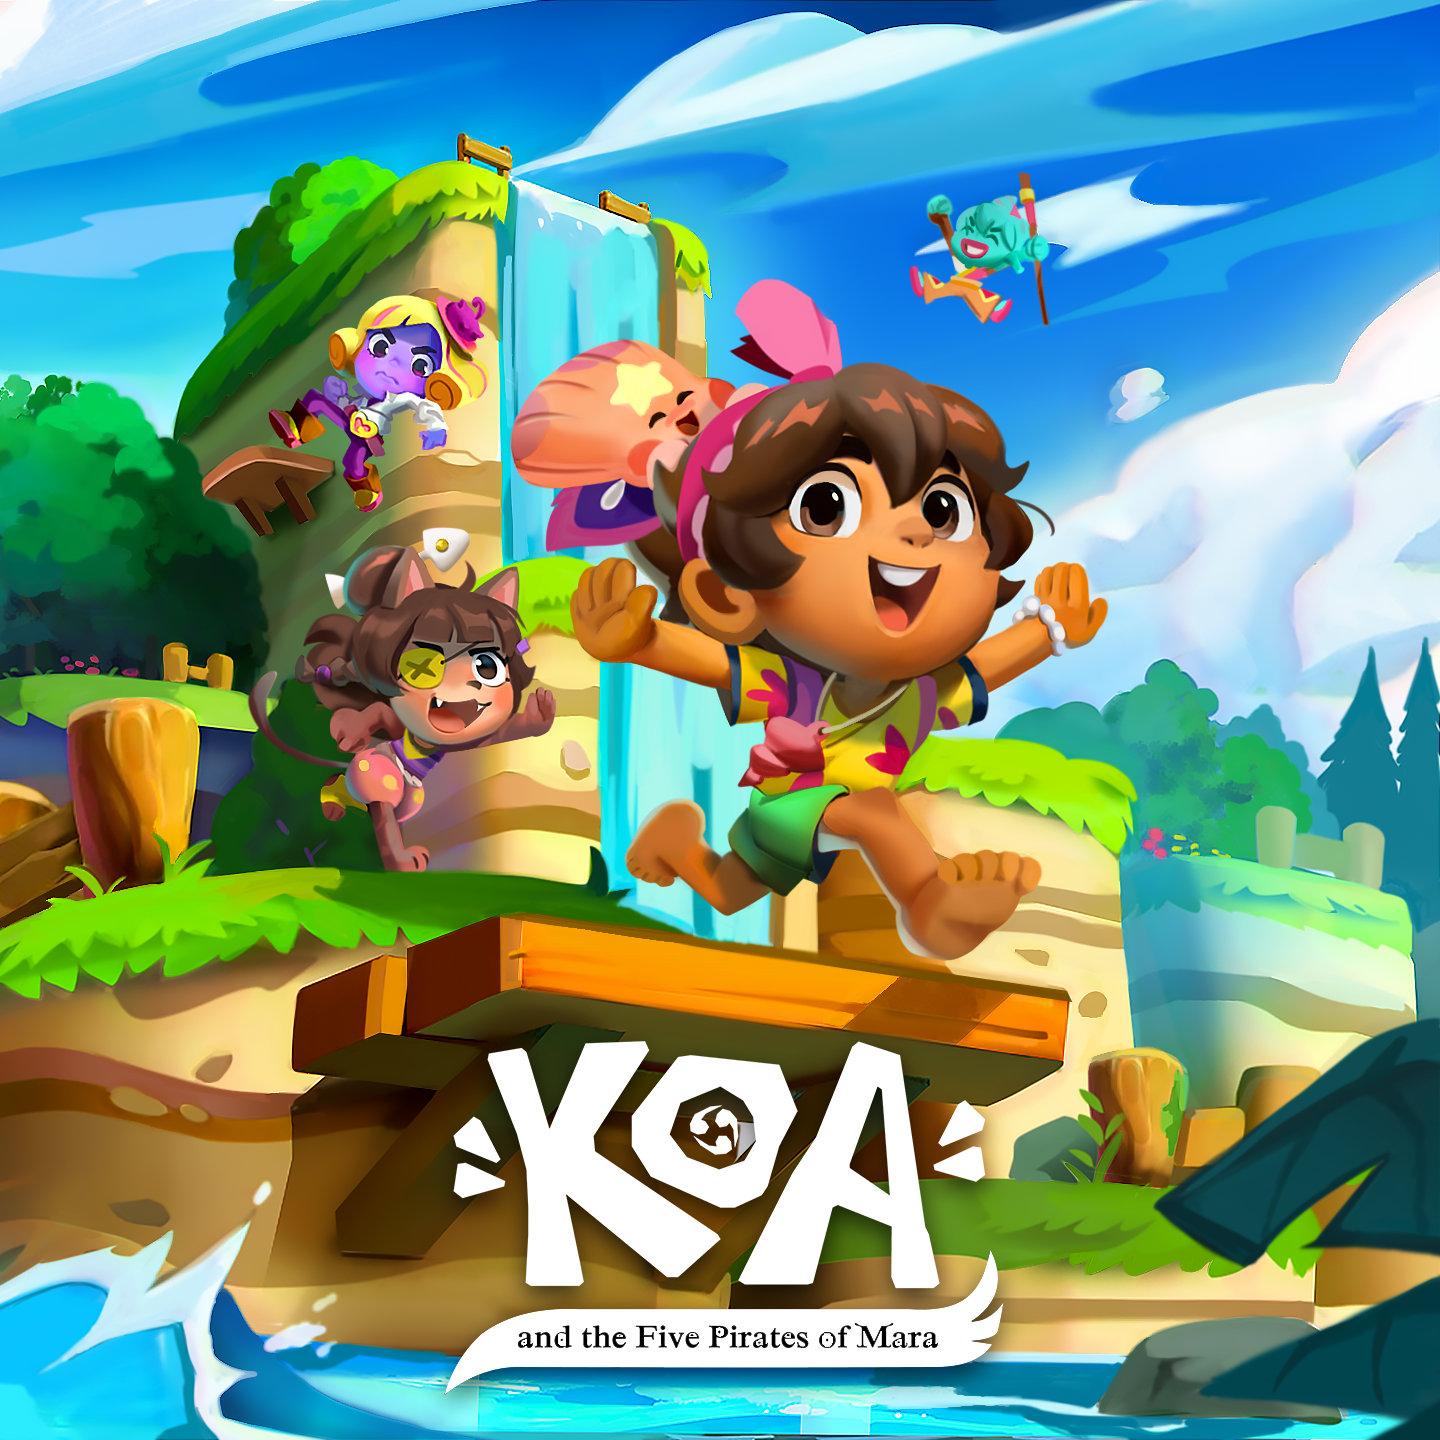 Koa and the Five Pirates of Mara - Official Gameplay Trailer